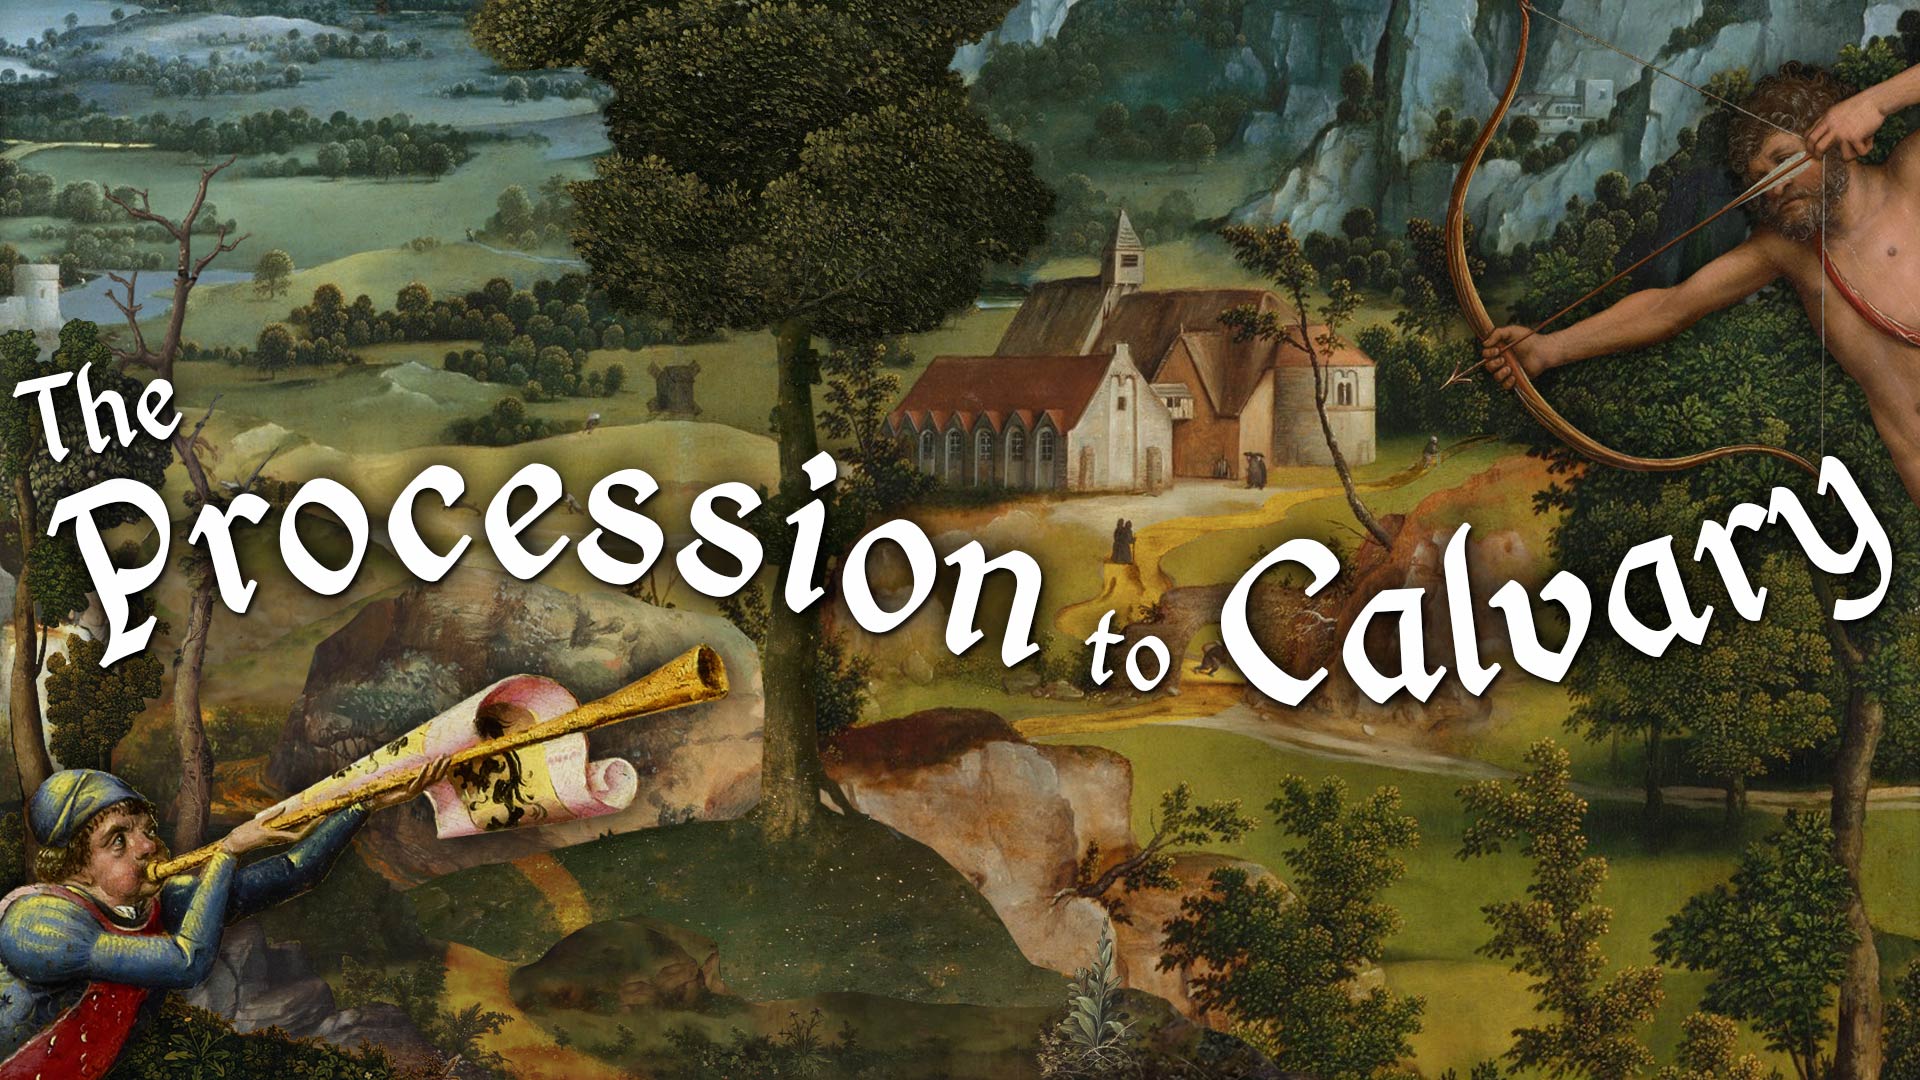 The Procession to Calvary review – My Massive sword